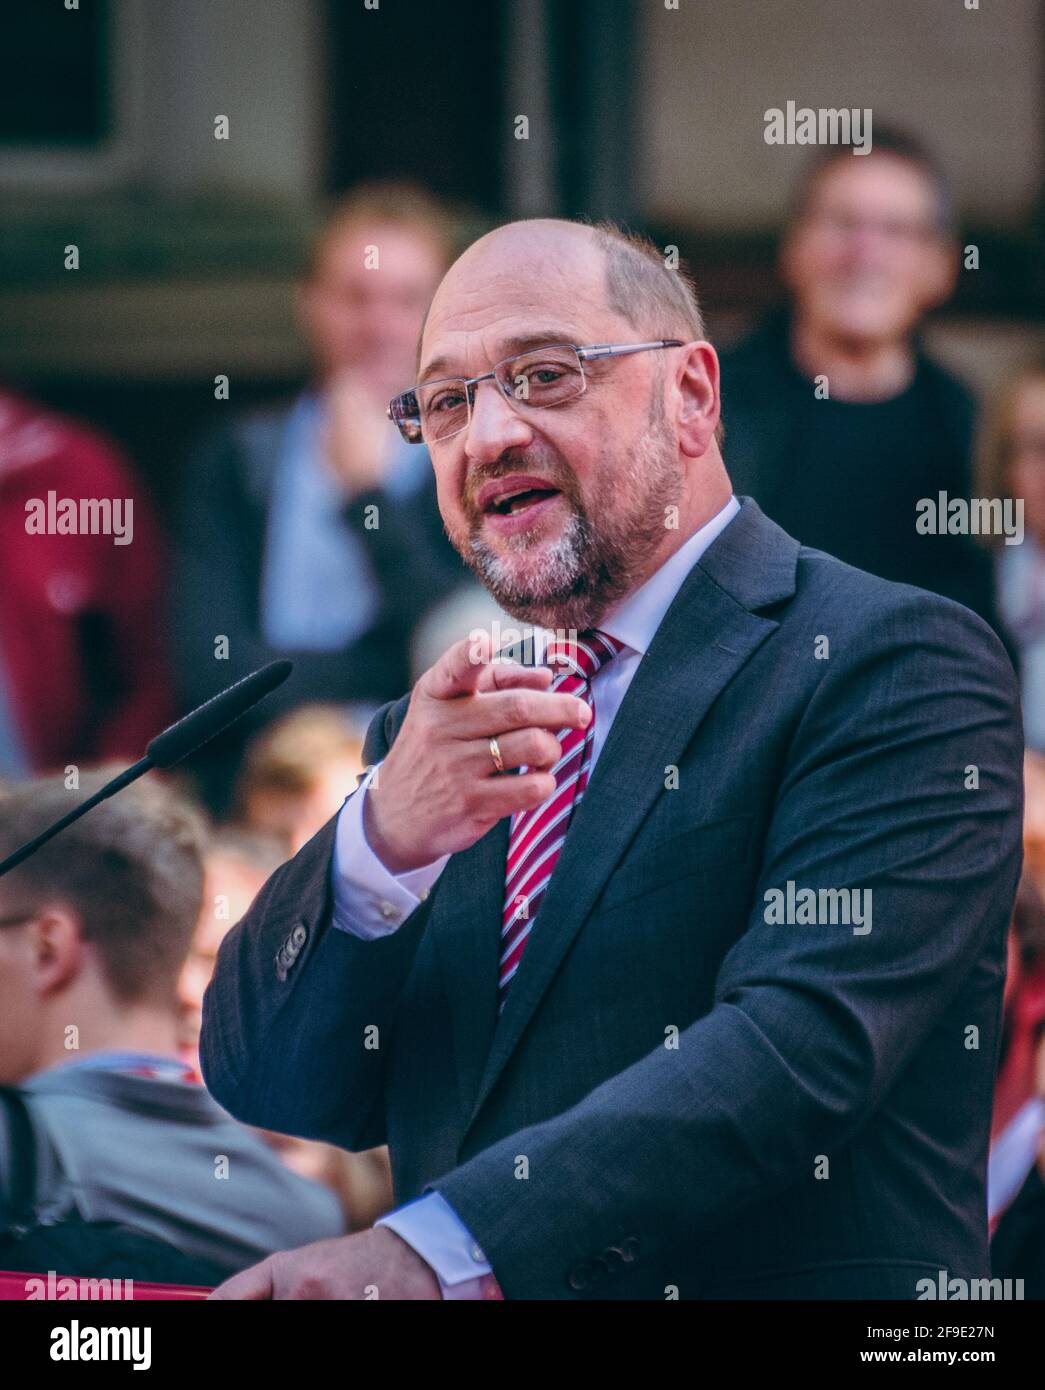 Aachen, Germany - 23 September 2017: Martin Schulz, German politician and social democrats candidate for the chancellorship helds election campaign sp Stock Photo